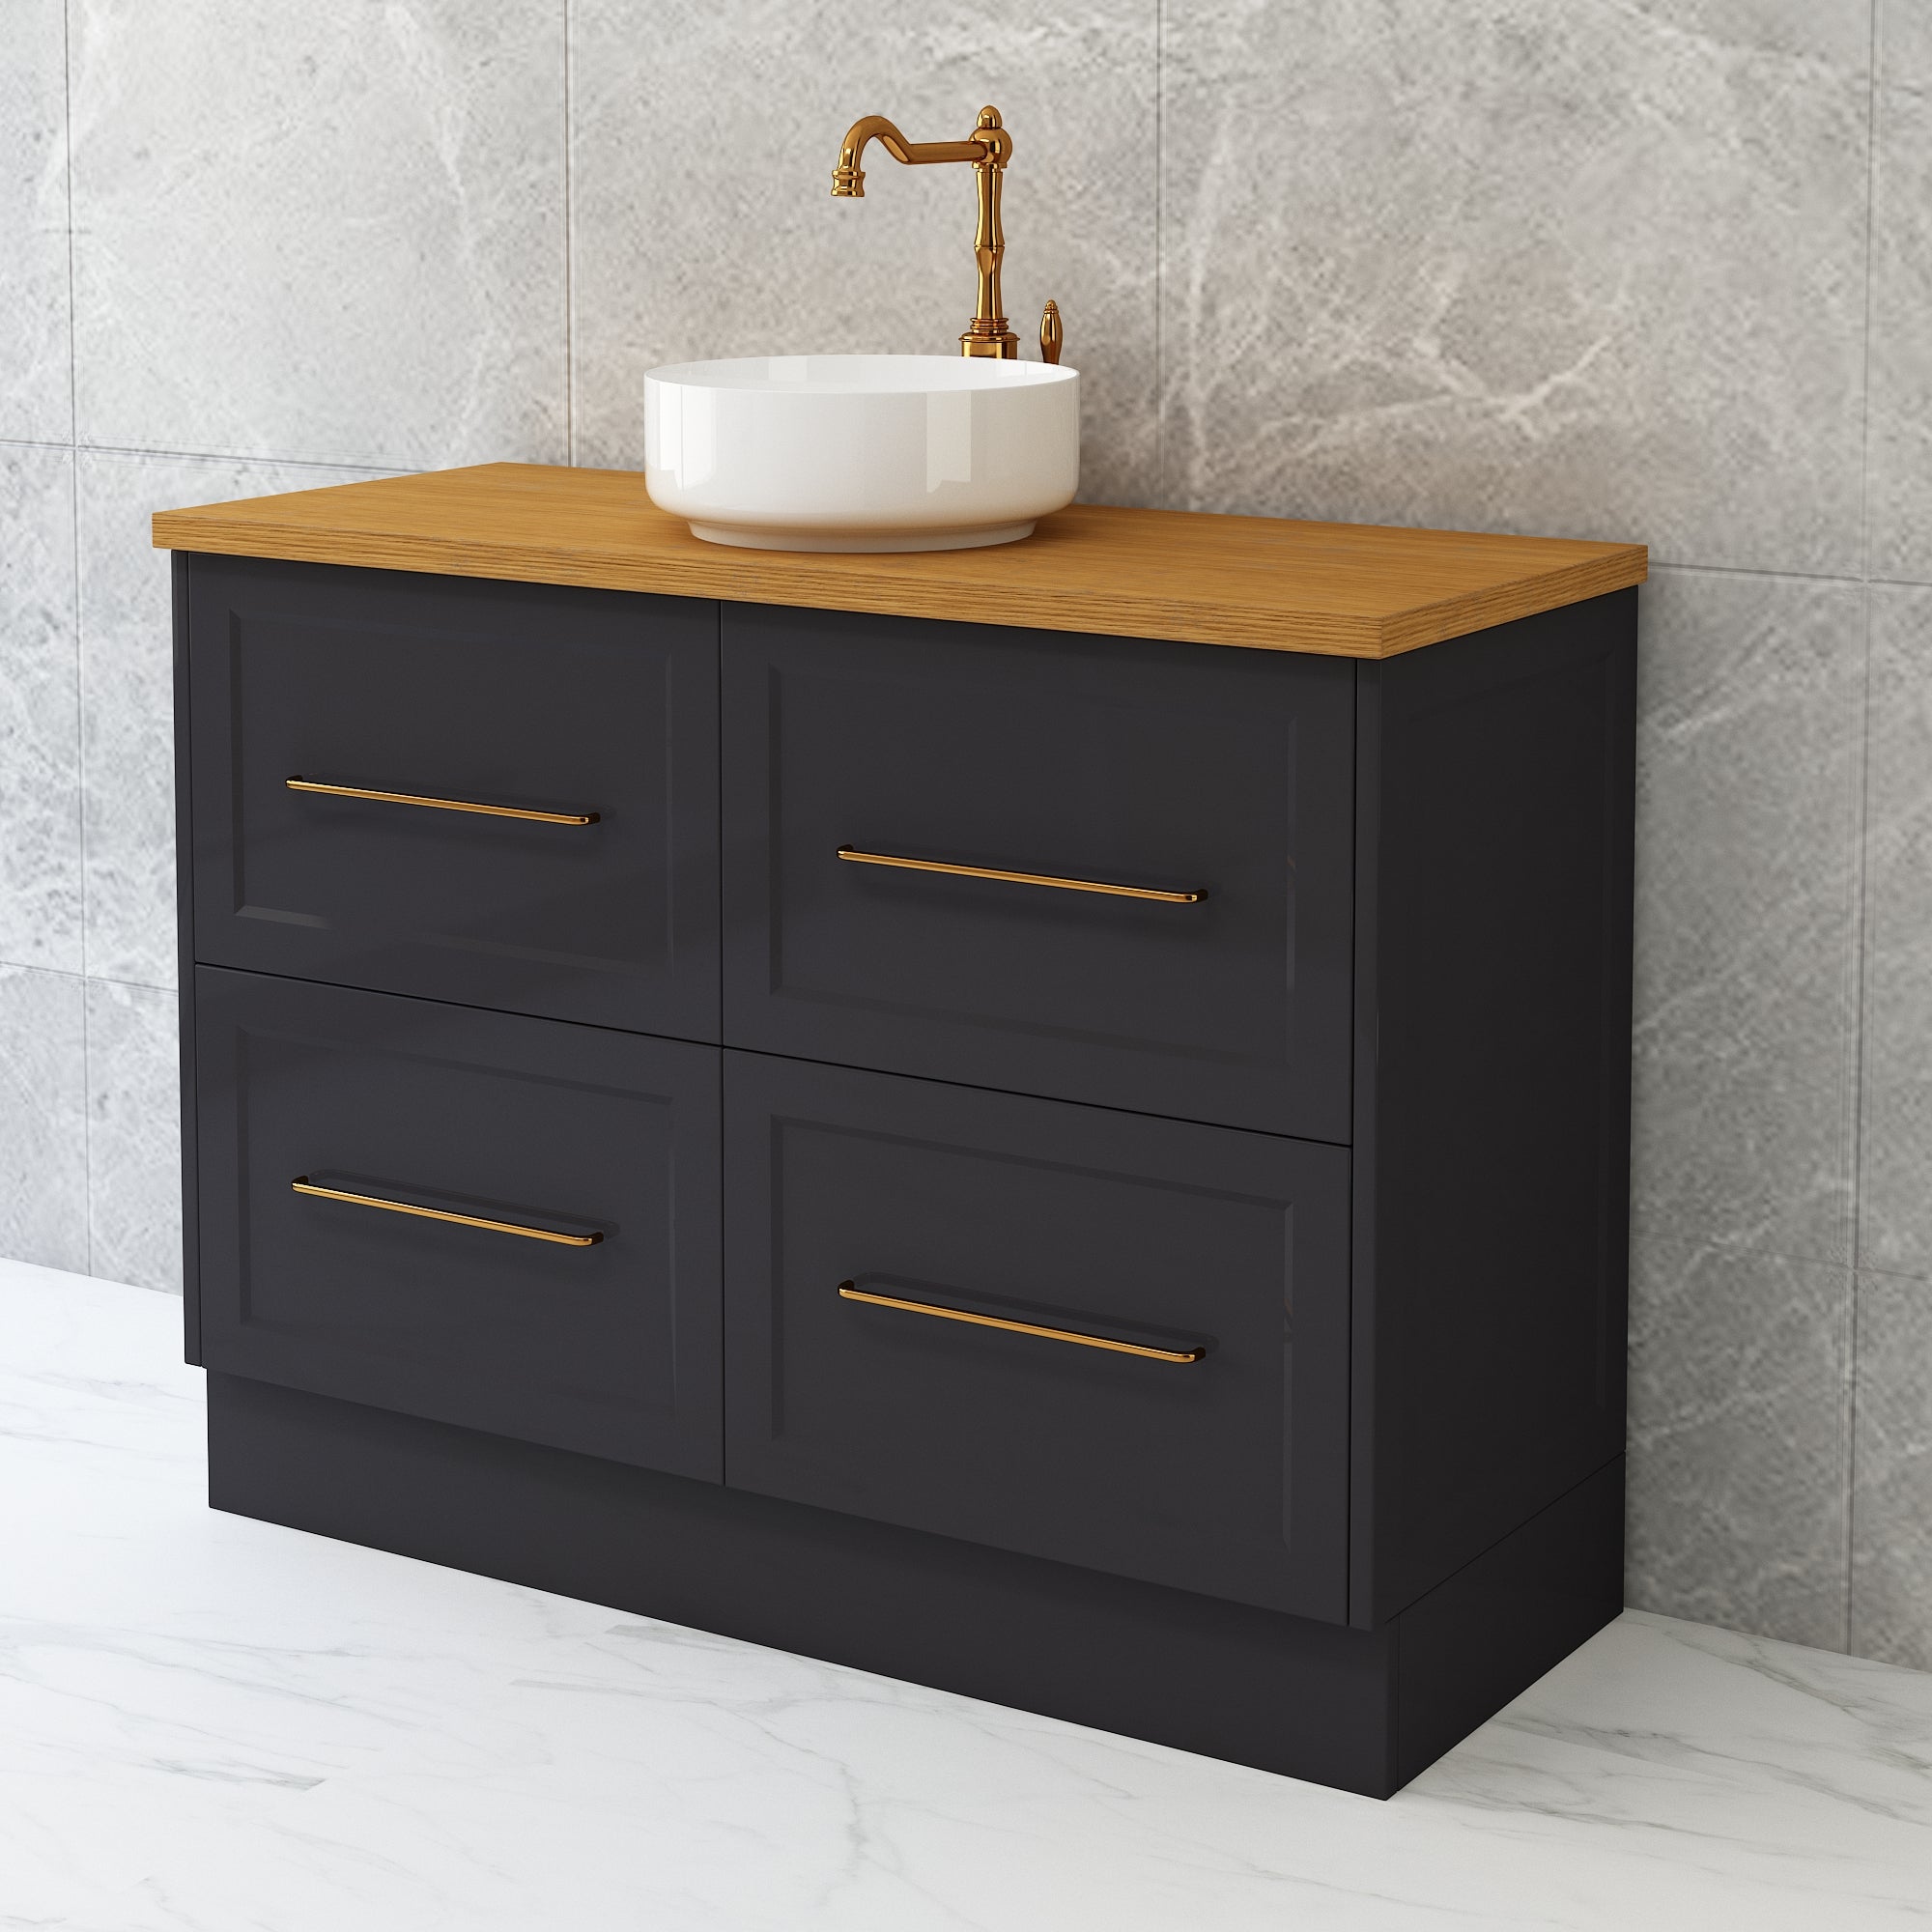 George Freestanding Bathroom Vanity in ANY COLOUR - ALL SIZES